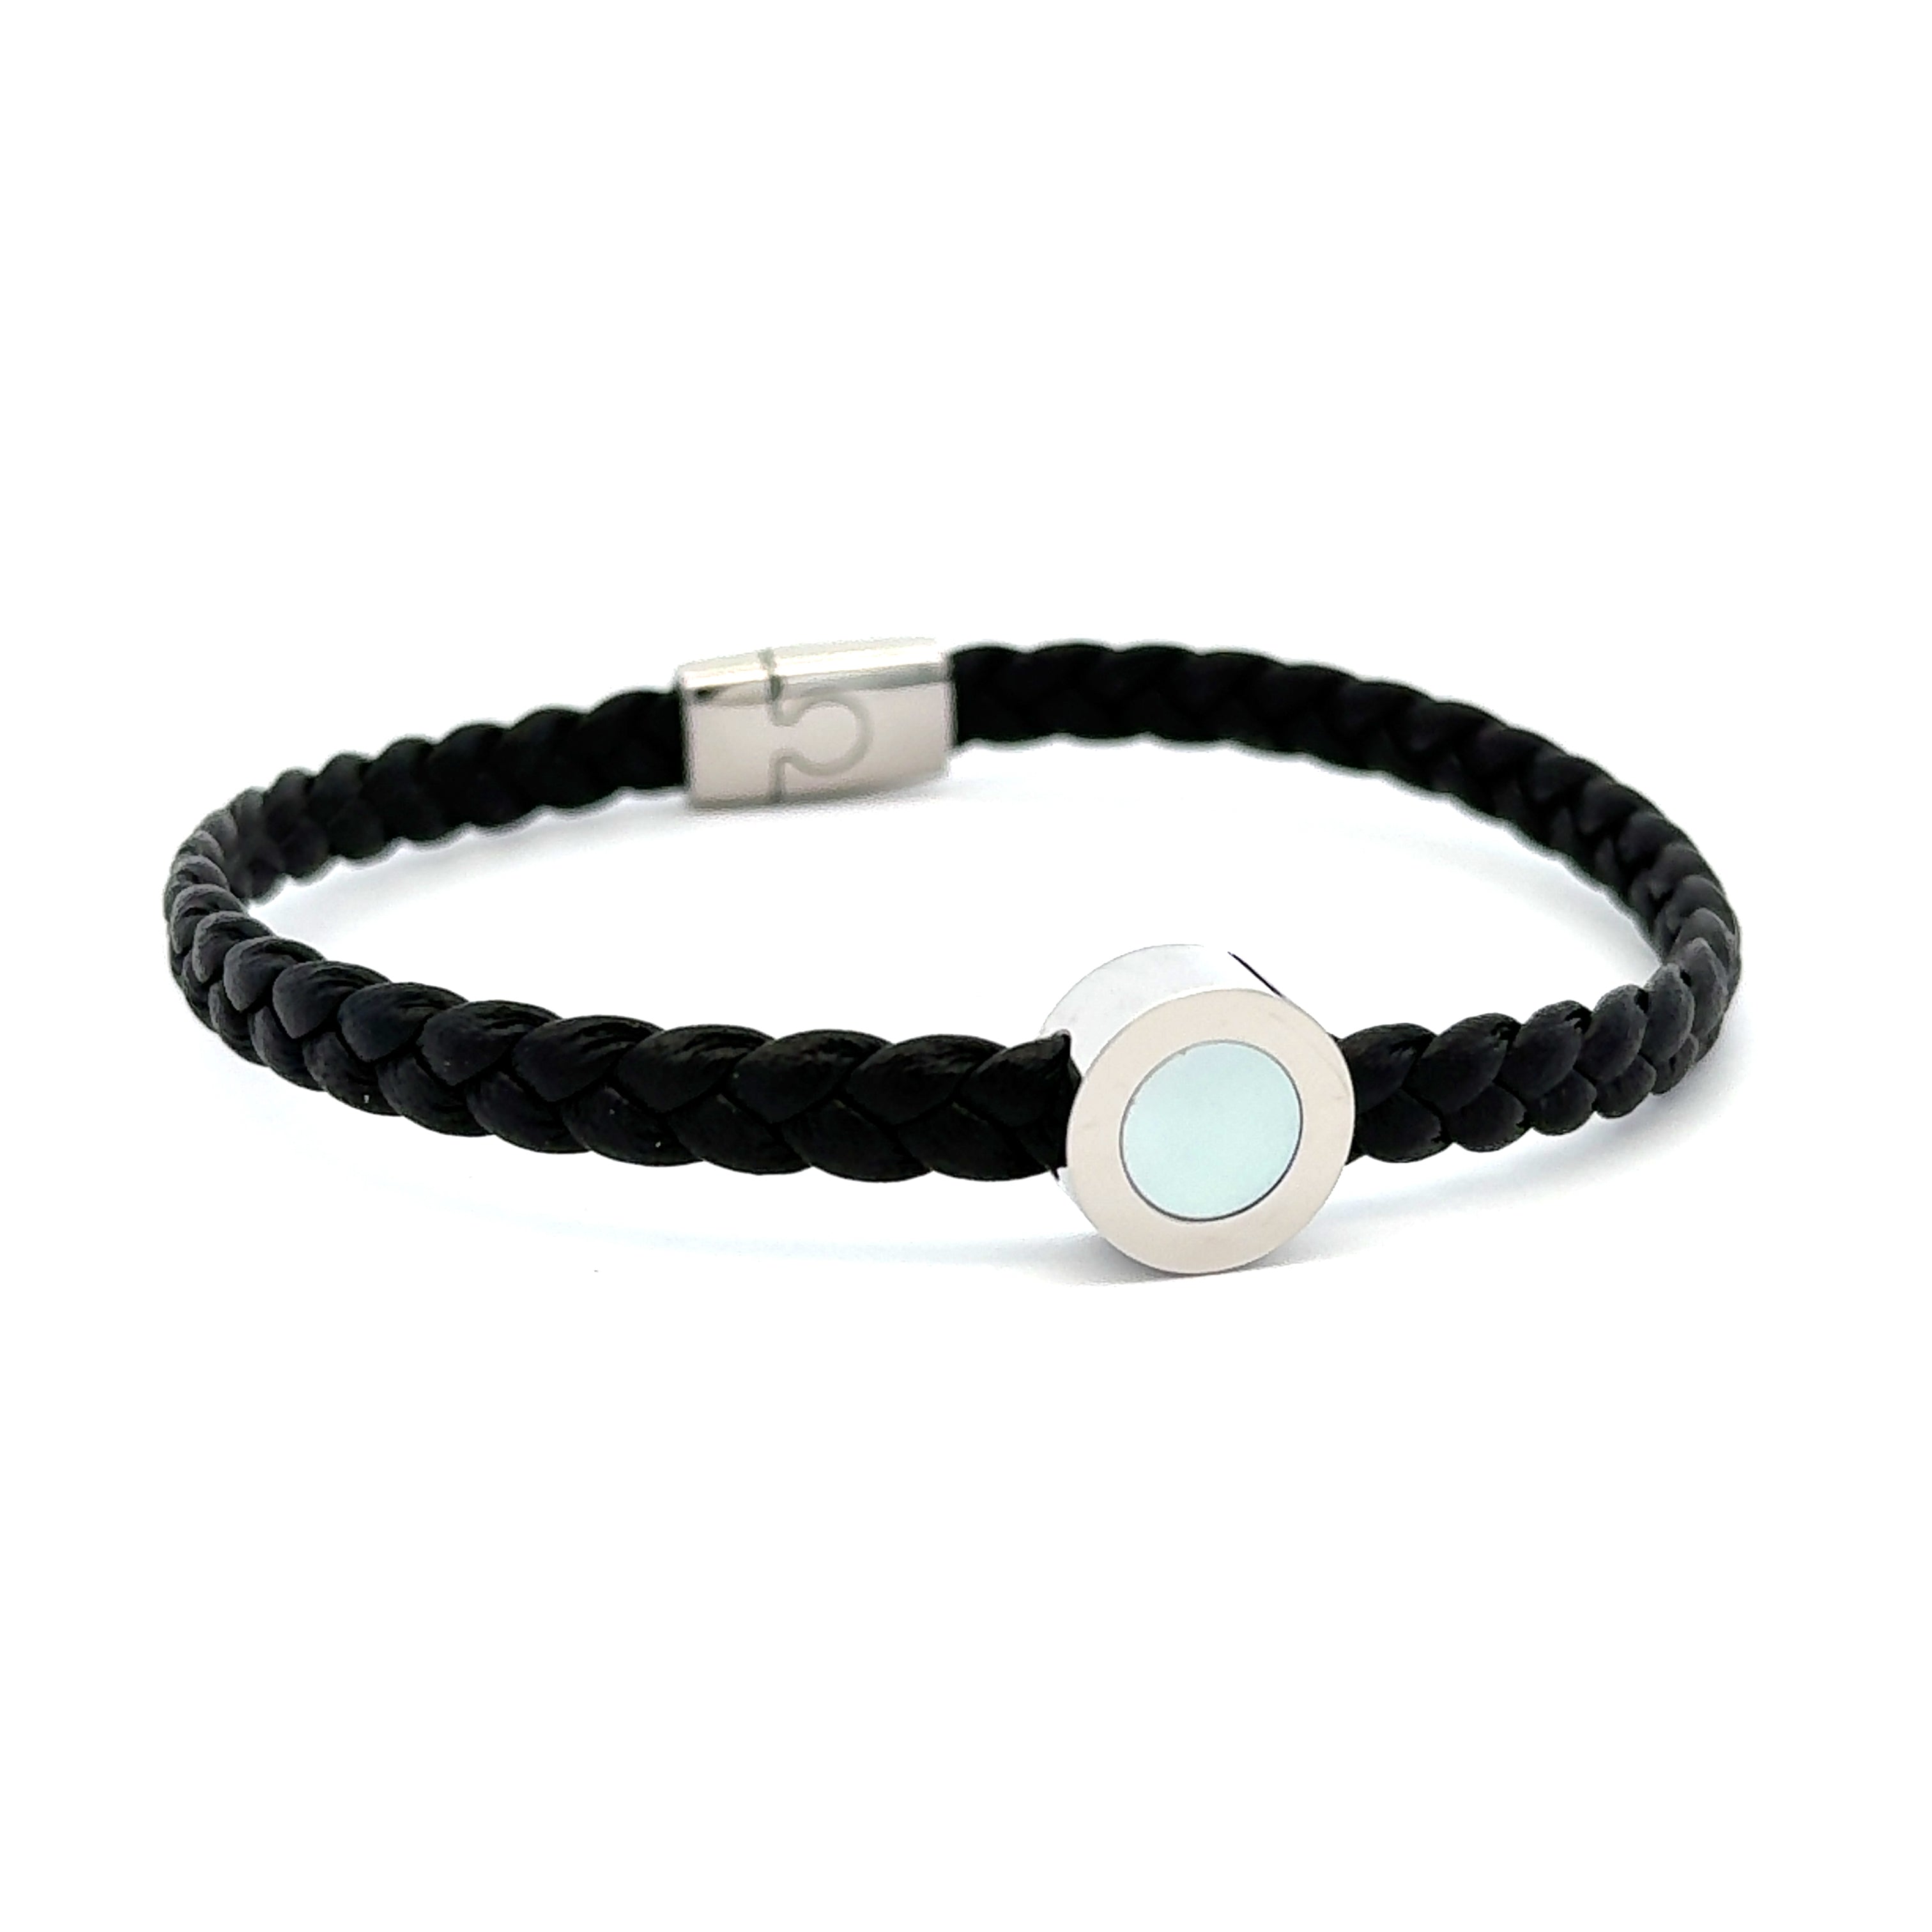 Stainless Steel Braided Black Leather Bracelet with White Mother of Pearl